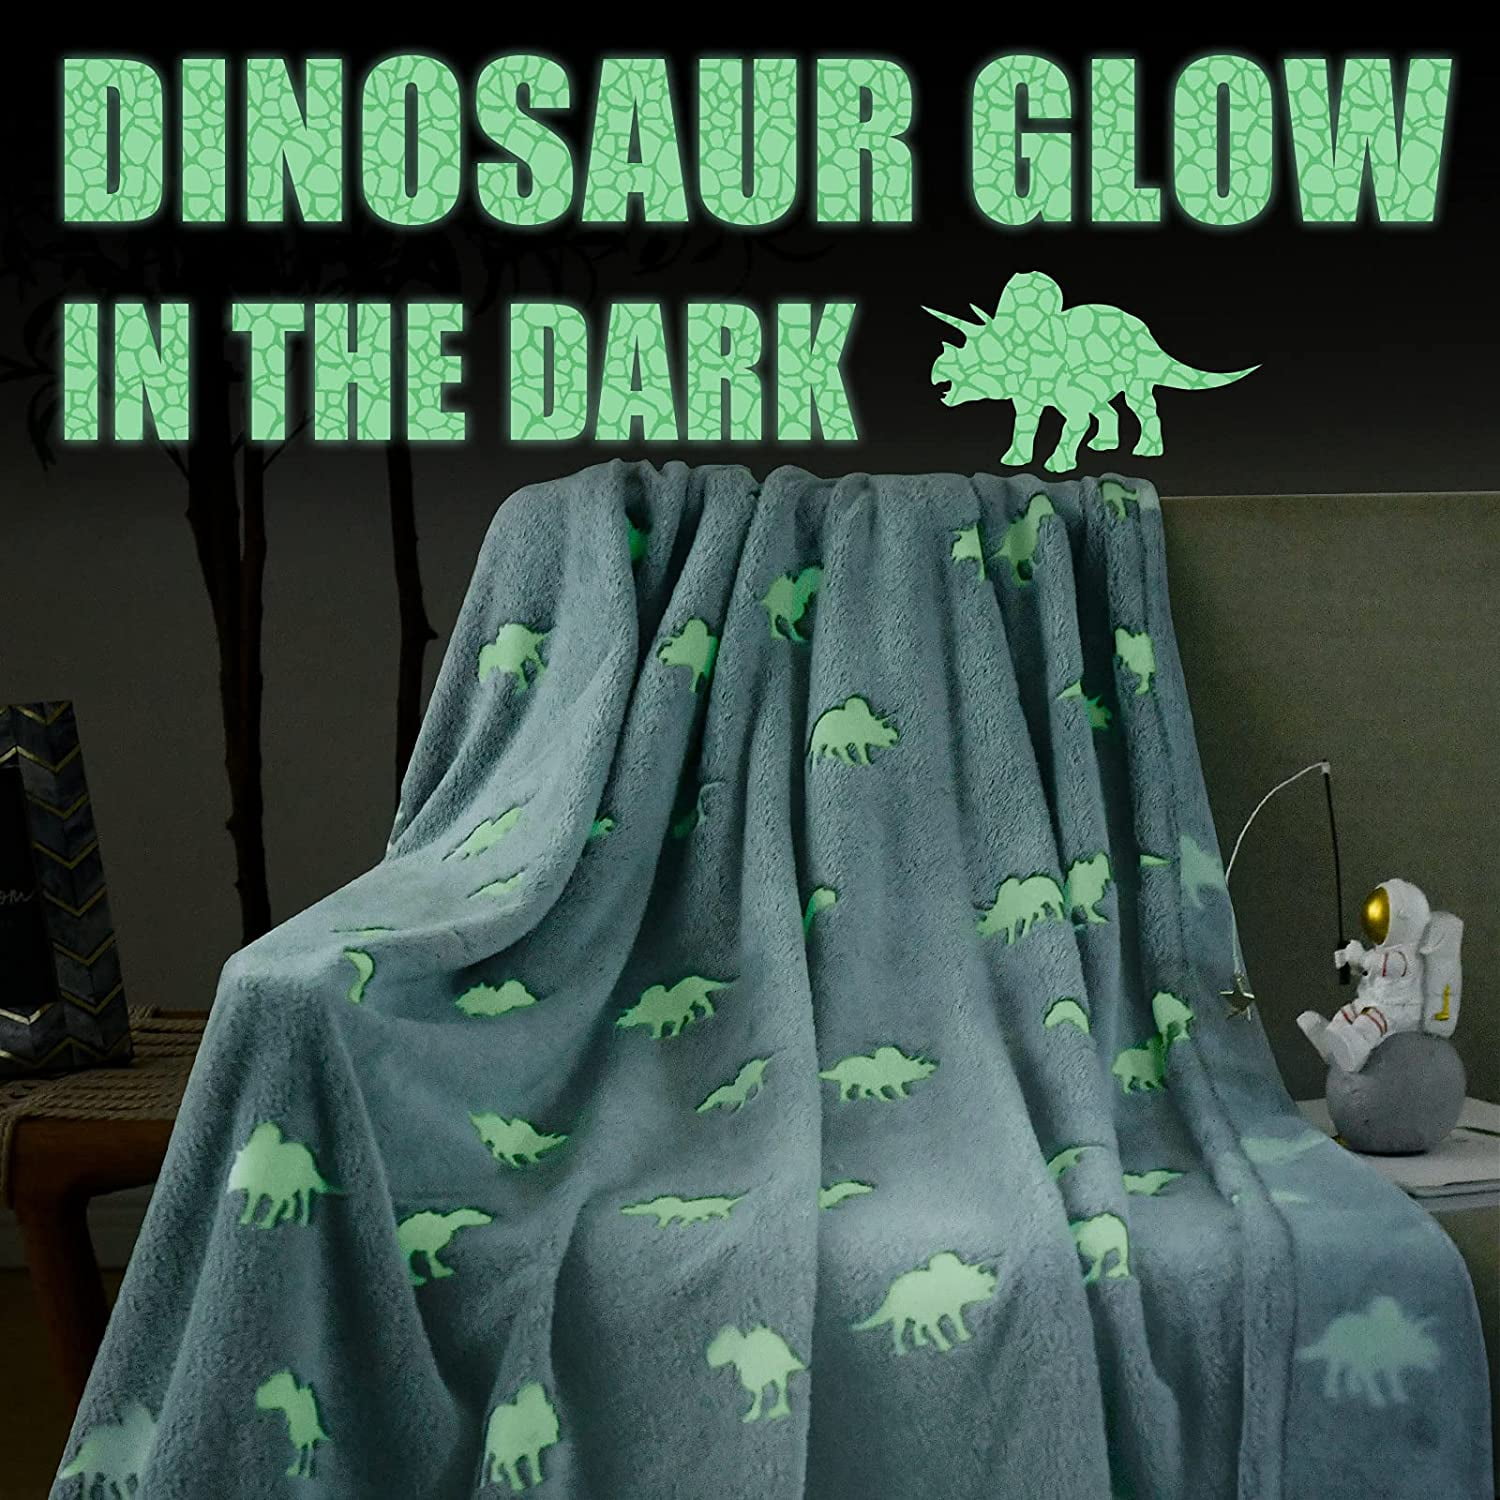 JINCHAN Dinosaur Throw Blanket Glow in The Dark Blue Lightweight Flannel Fleece Throw Blankets for Nursery Couch Bed Decor Magical Blankets All Seasons Gift for Girls Boys Baby Kids 40x60 Inch